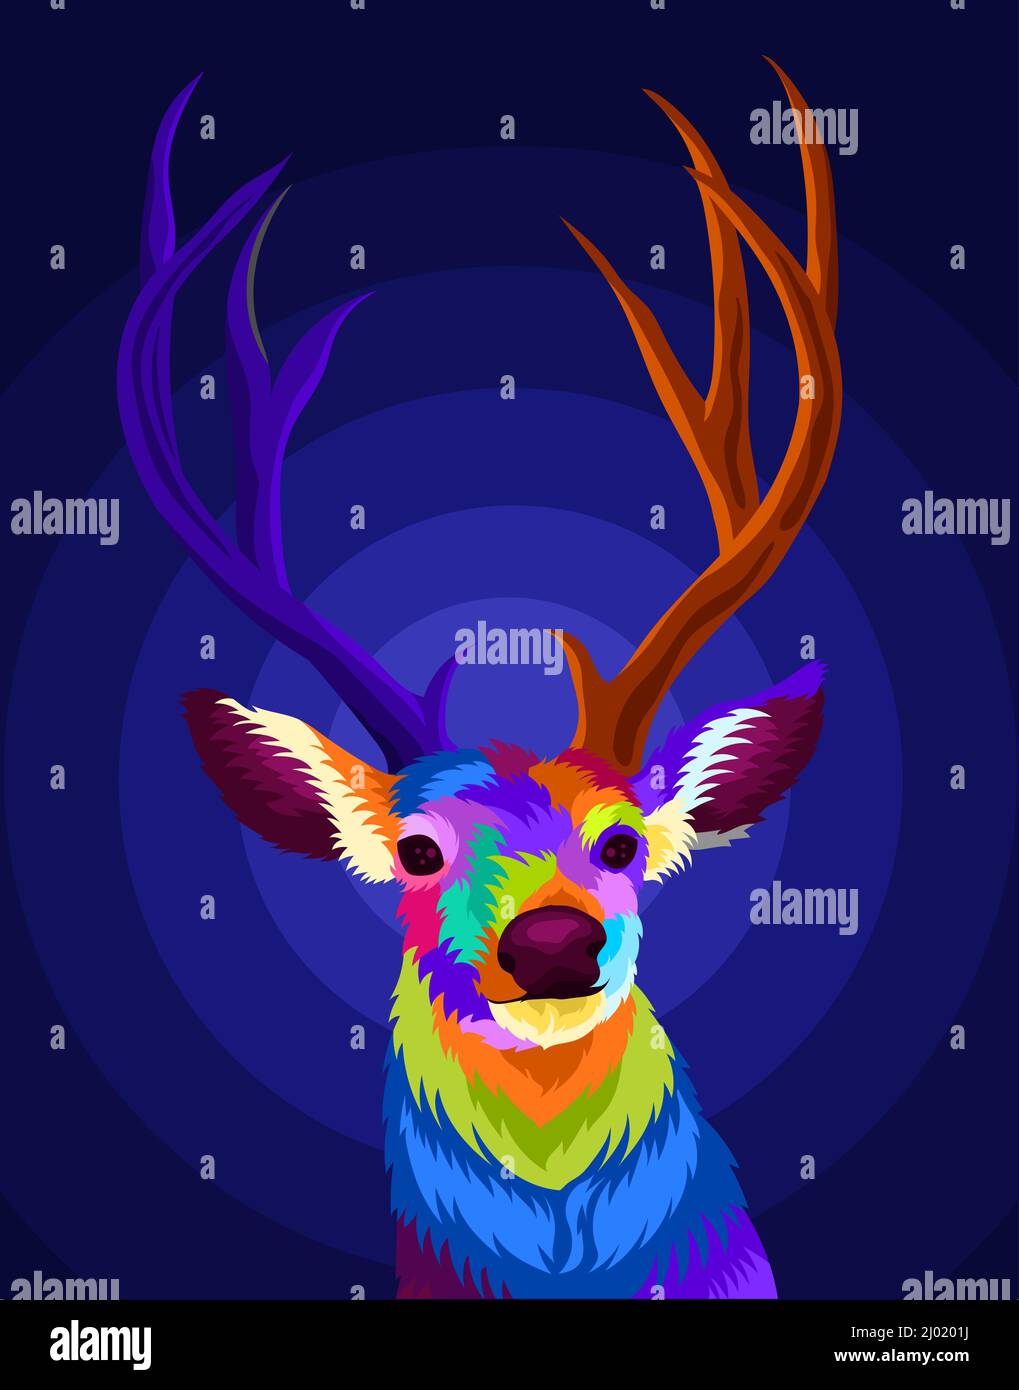 illustration deer with pop art style Stock Vector